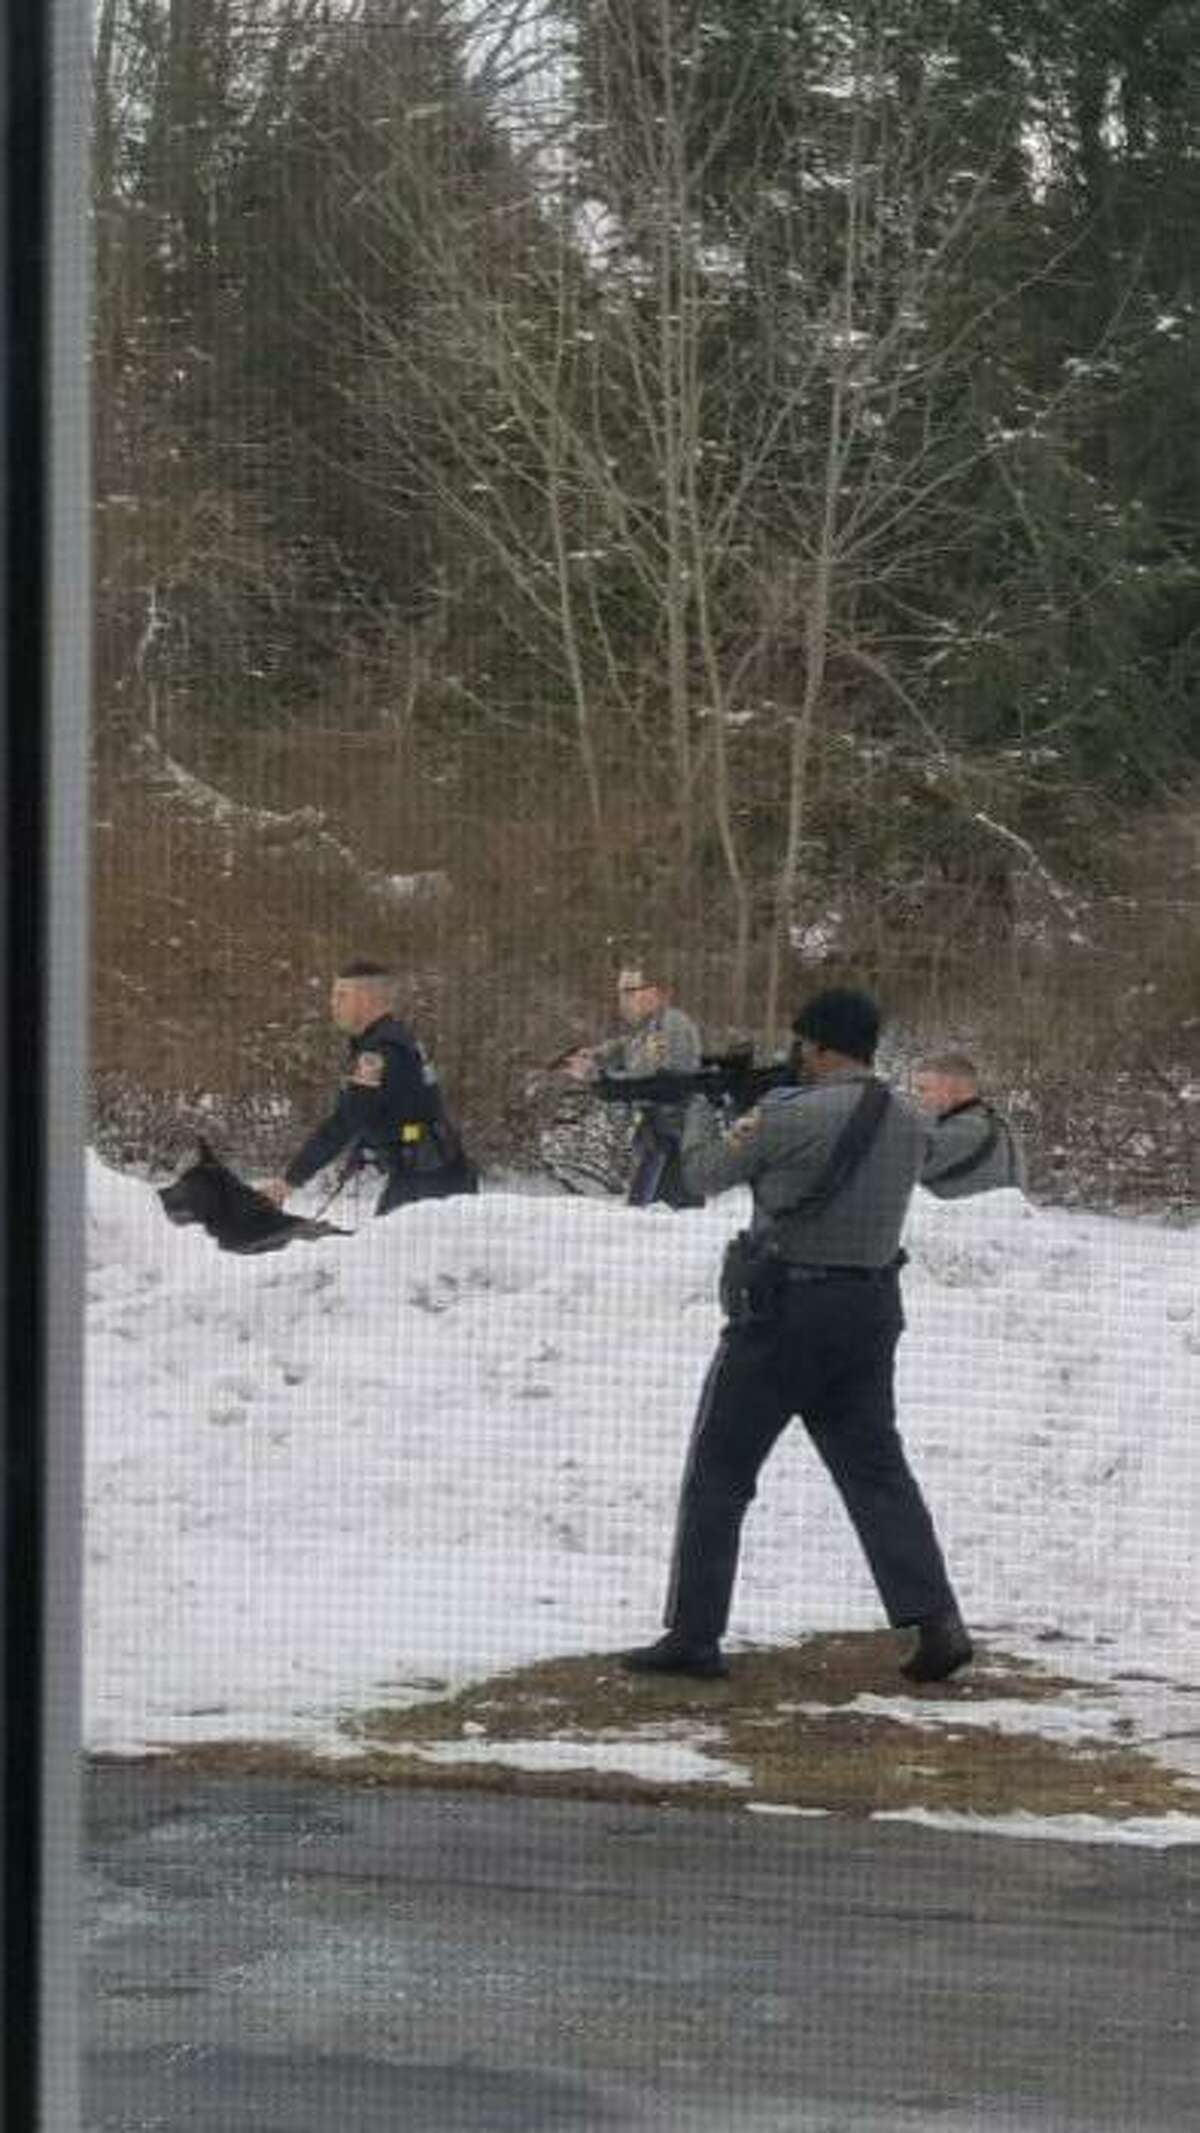 TOLLAND, Conn. — Resident Lance Shackway captured these photos as state police took several suspects into custody during an incident around 3 p.m. Saturday, Feb. 20. State police said a Trooper was hospitalized after a cruiser was intentionally struck by one of the suspects.